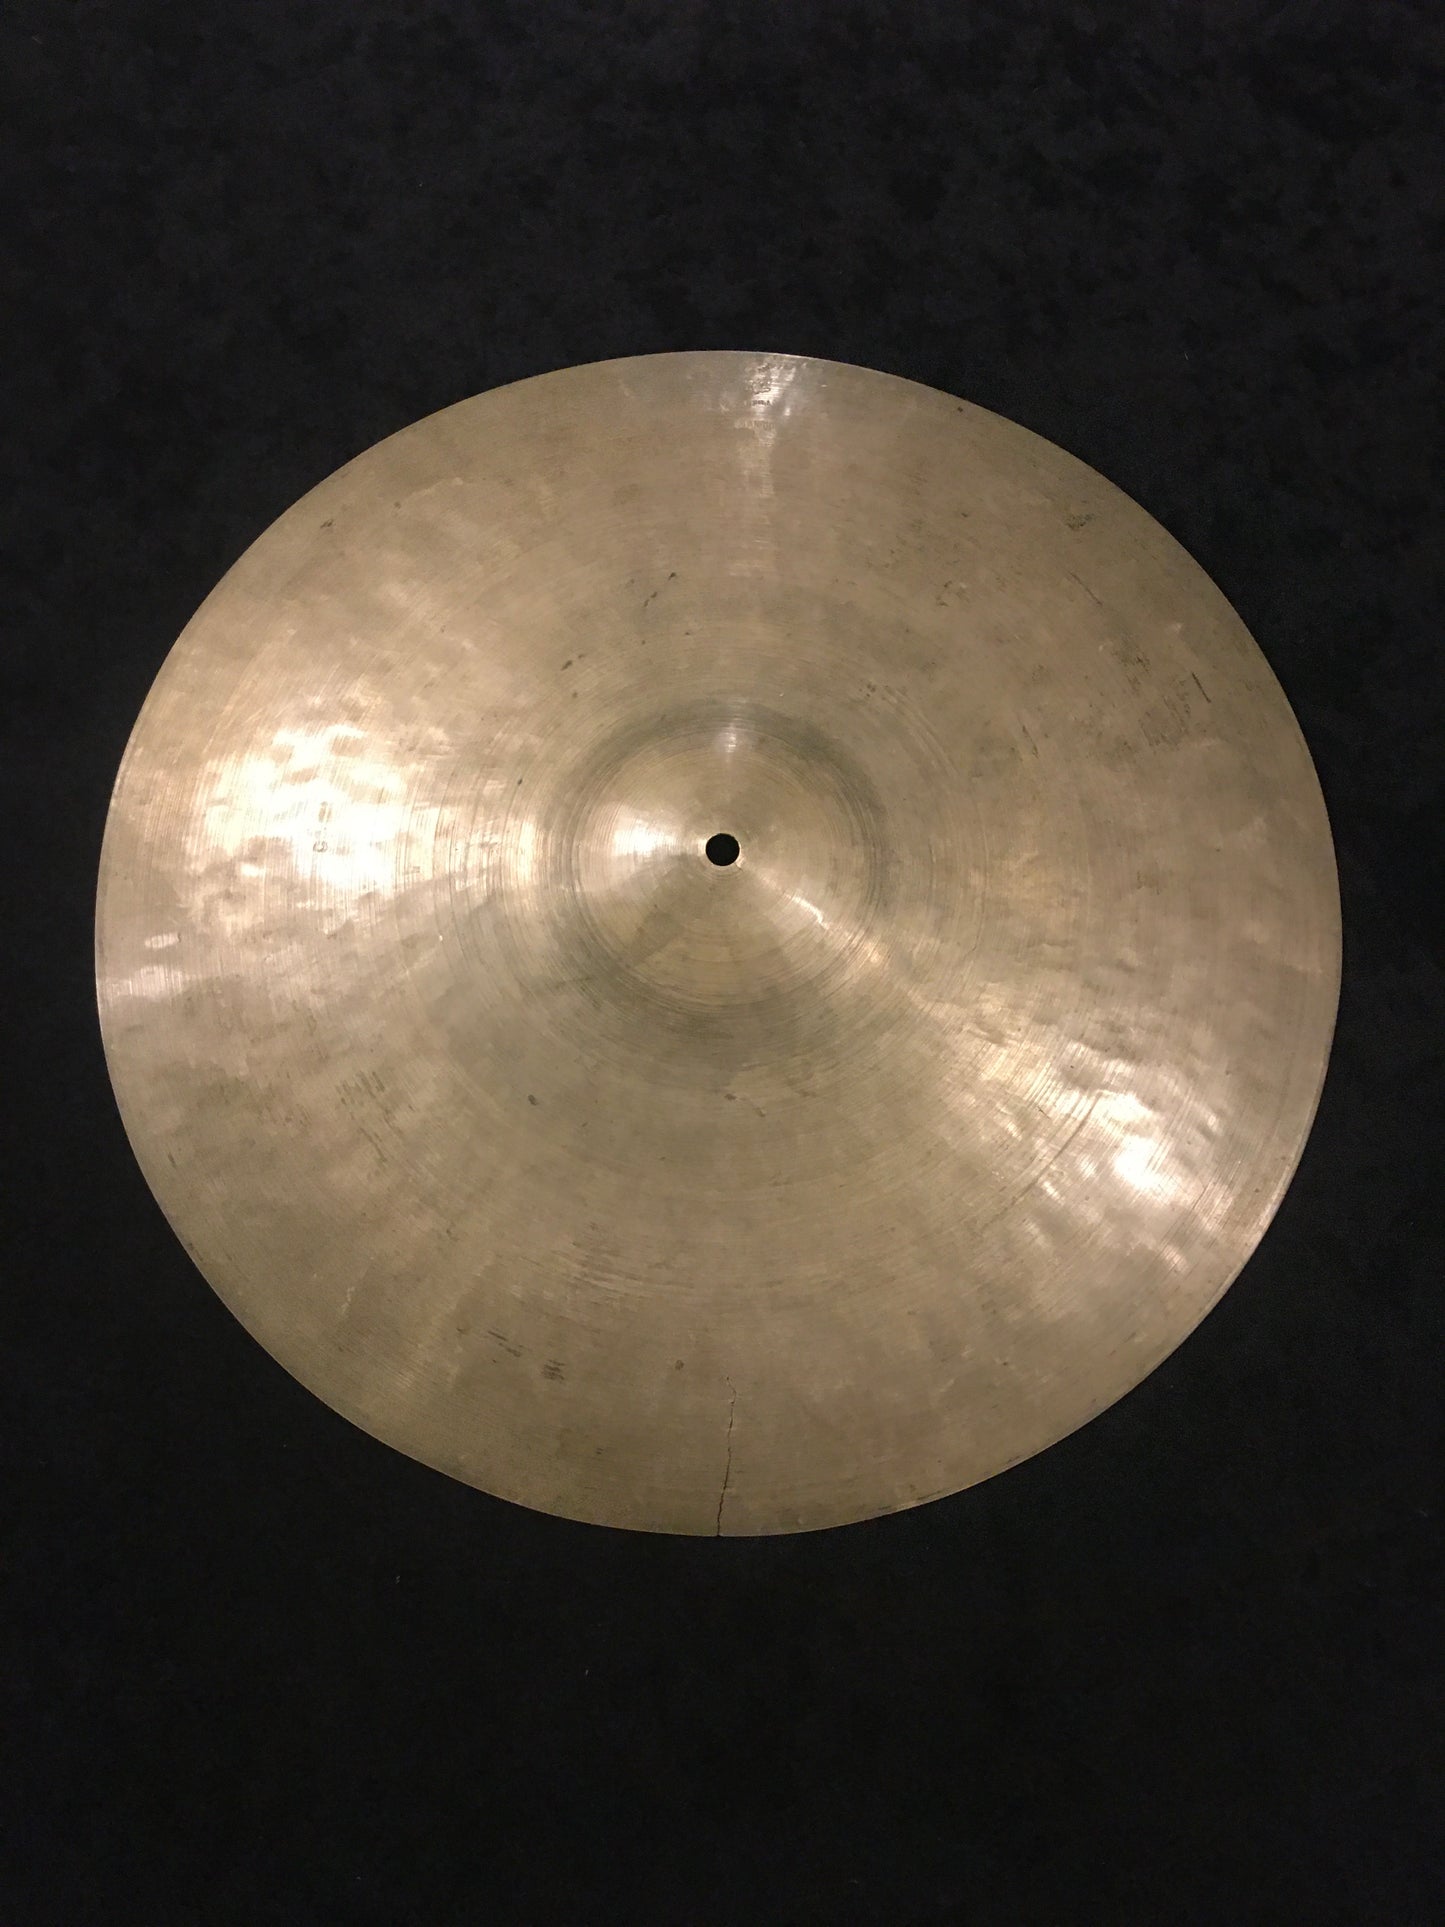 16" K. Zildjian Istanbul Old Stamp Small Ride Cymbal 1534g *Video Demo*